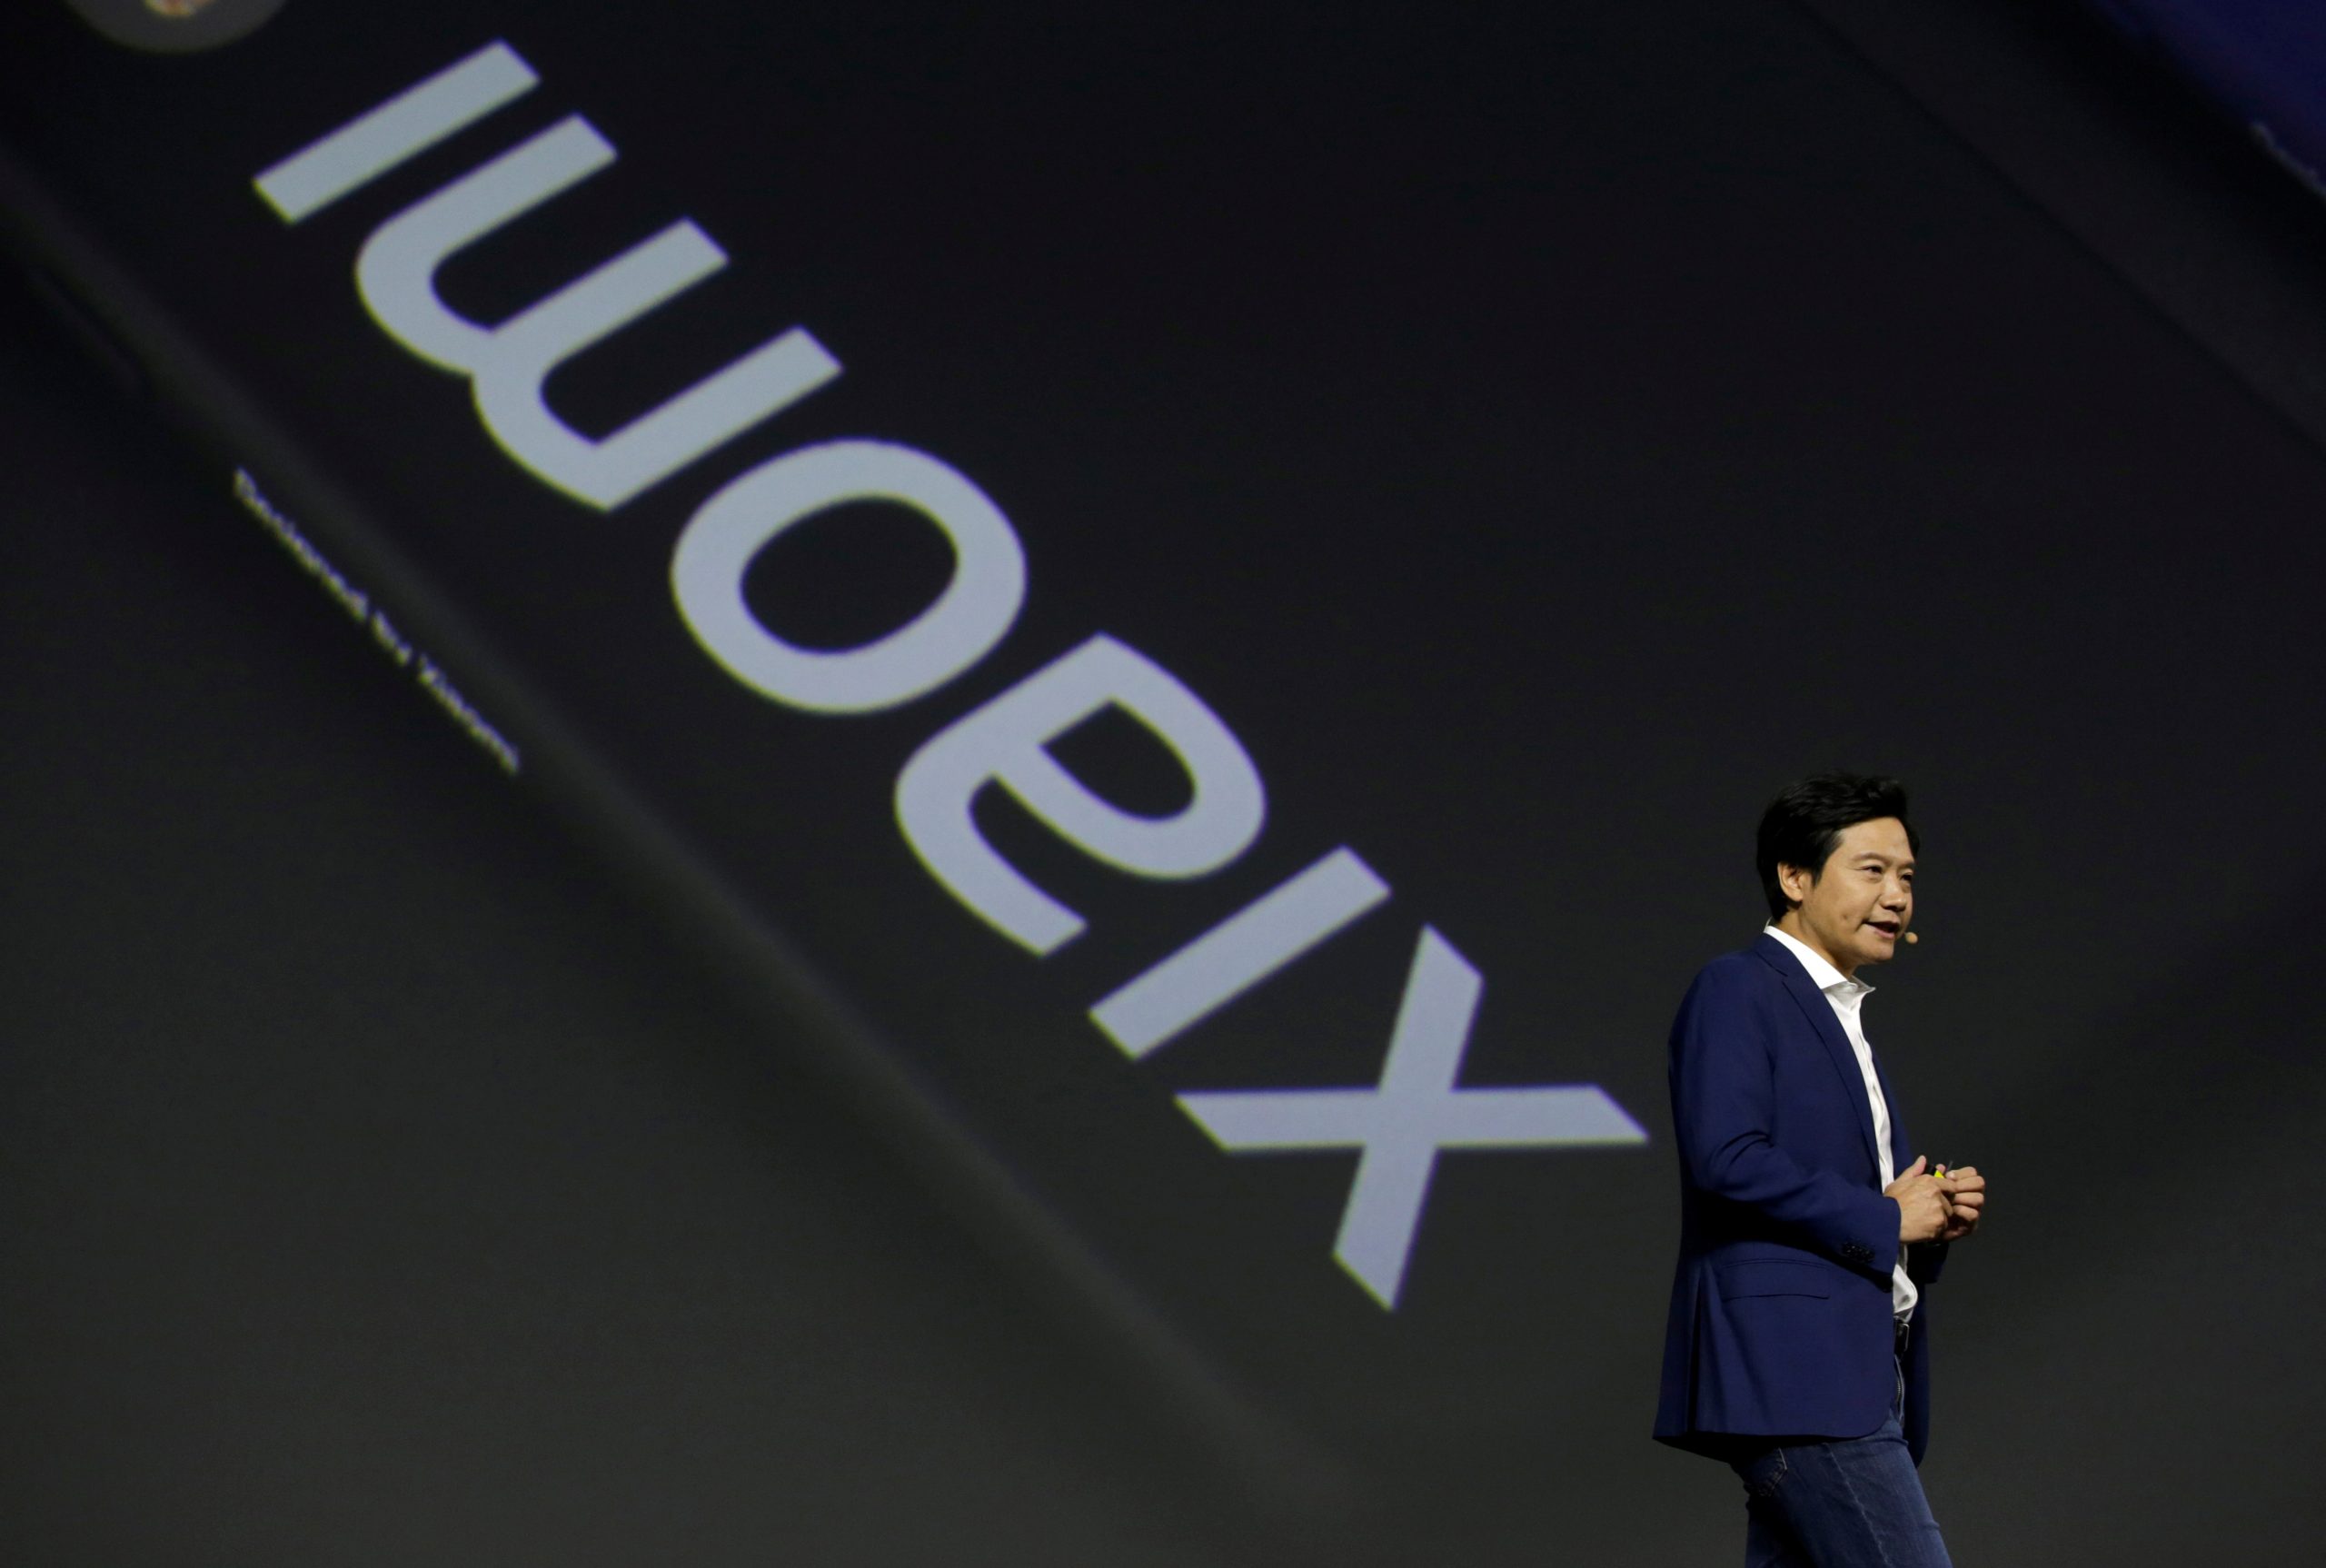 FILE PHOTO: Xiaomi founder and CEO Lei Jun attends a launch ceremony of the flagship phone Xiaomi Mi 9 in Beijing FILE PHOTO: Xiaomi founder and CEO Lei Jun attends a launch ceremony of the flagship phone Xiaomi Mi 9 in Beijing, China, Feb. 20, 2019. REUTERS/Jason Lee/File Photo JASON LEE